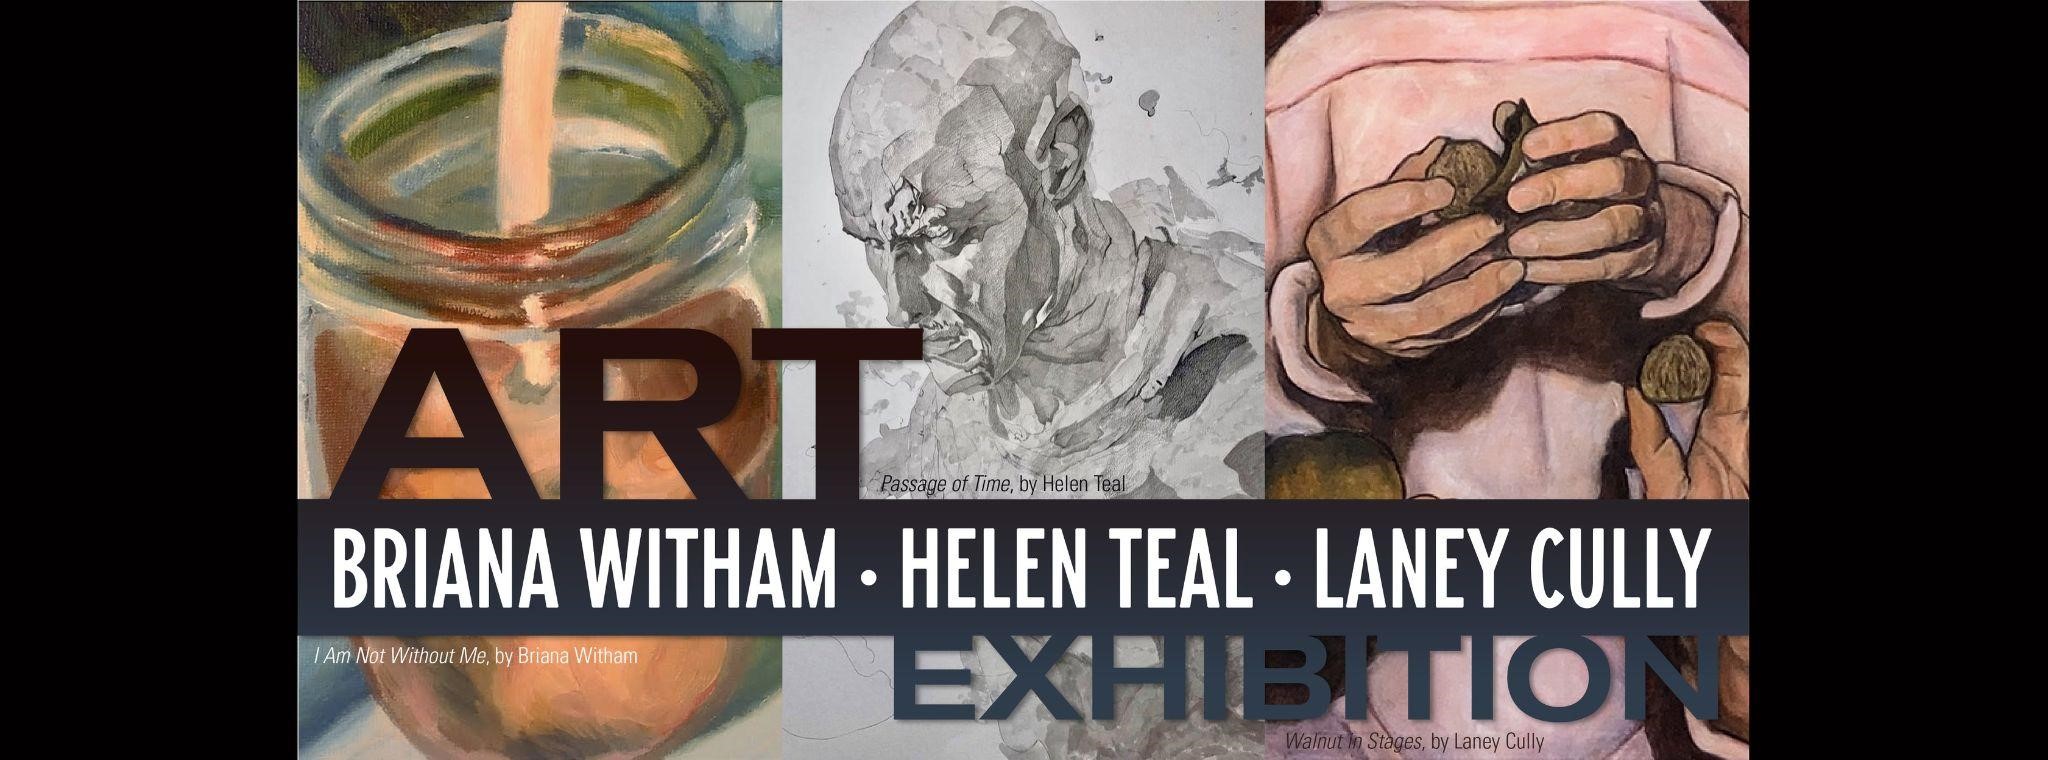 Art Exhibition - Briana Witham, Helen Teal, Laney Cully 